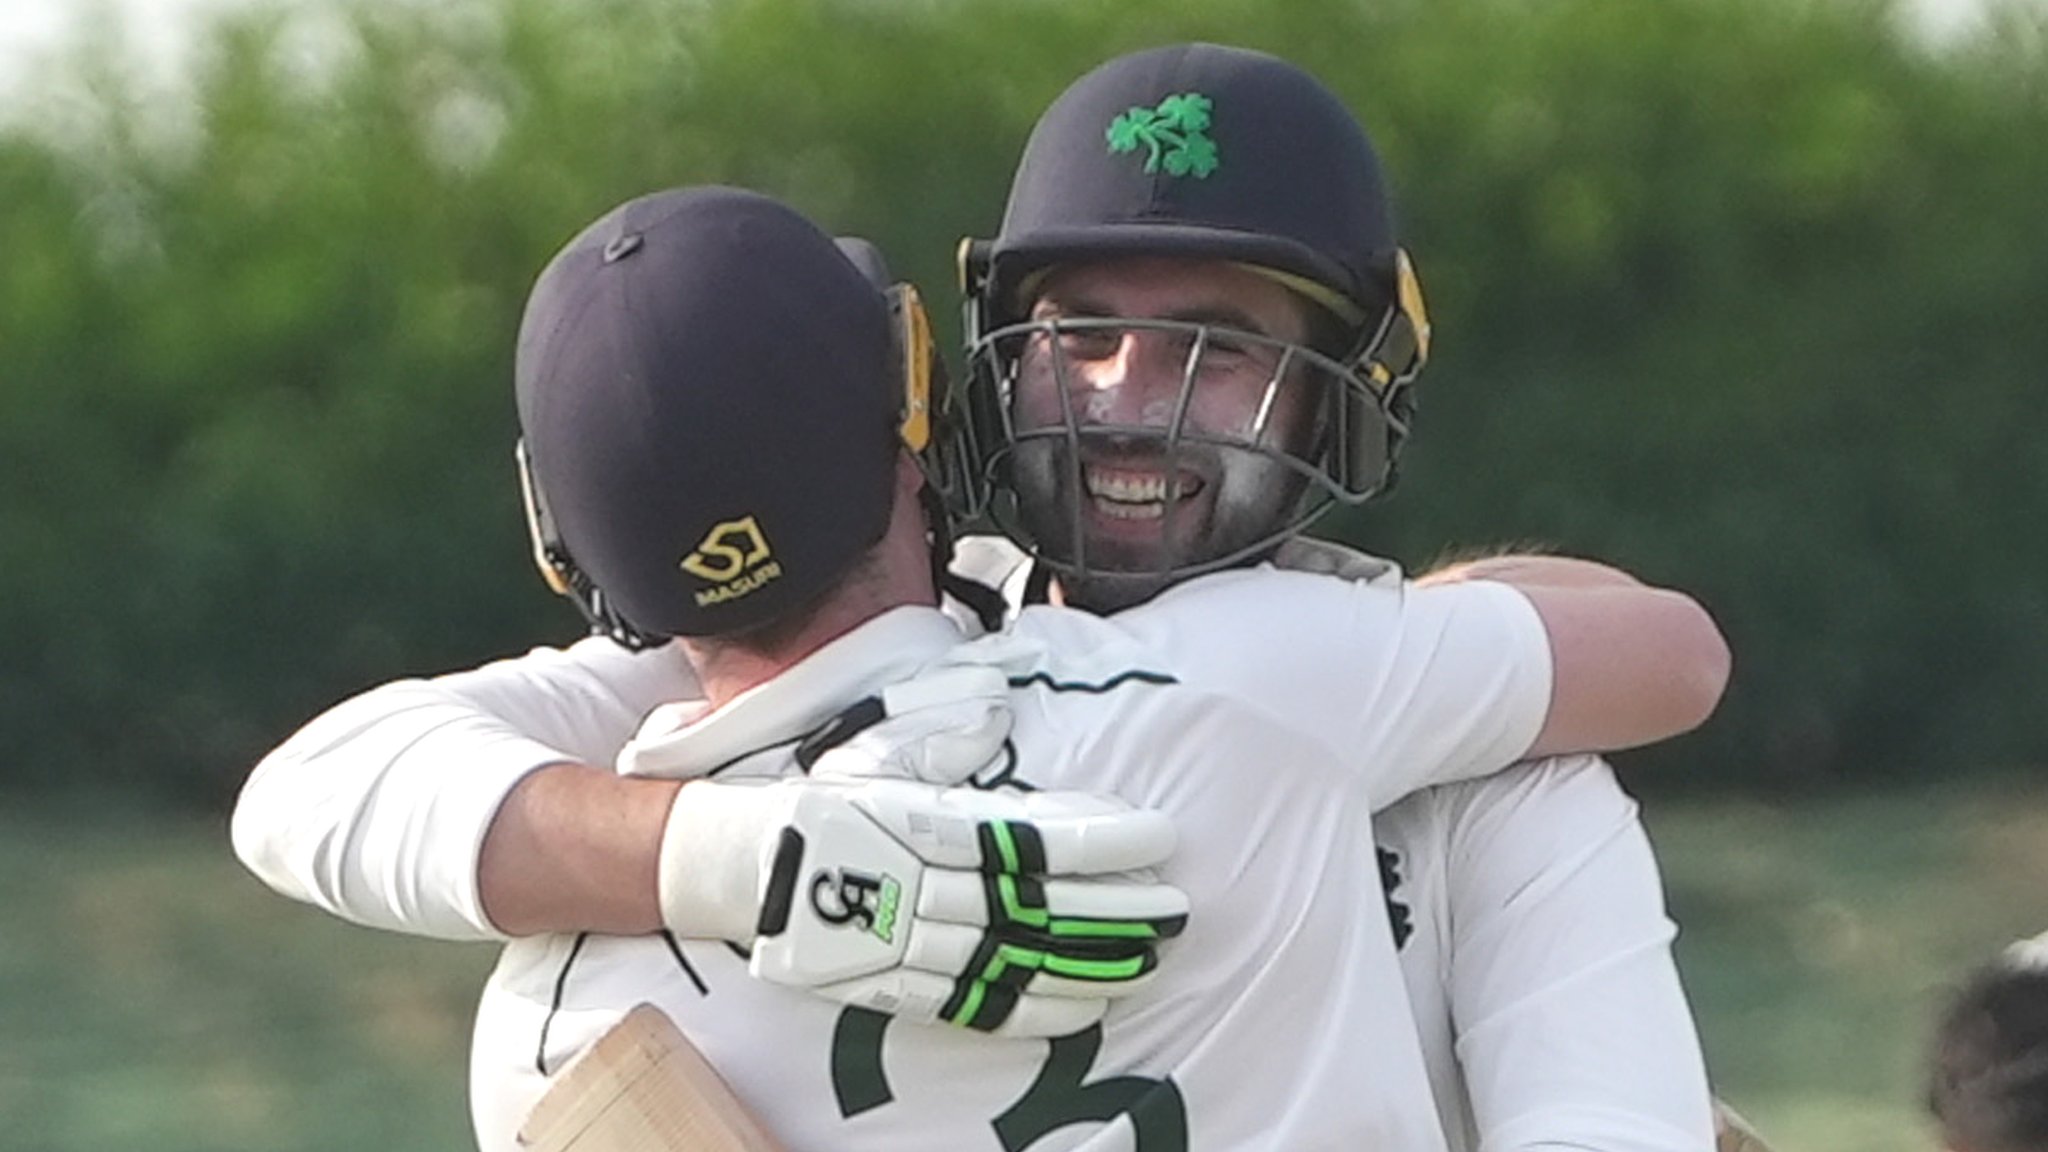 Ireland claim first mens Test victory by beating Afghanistan